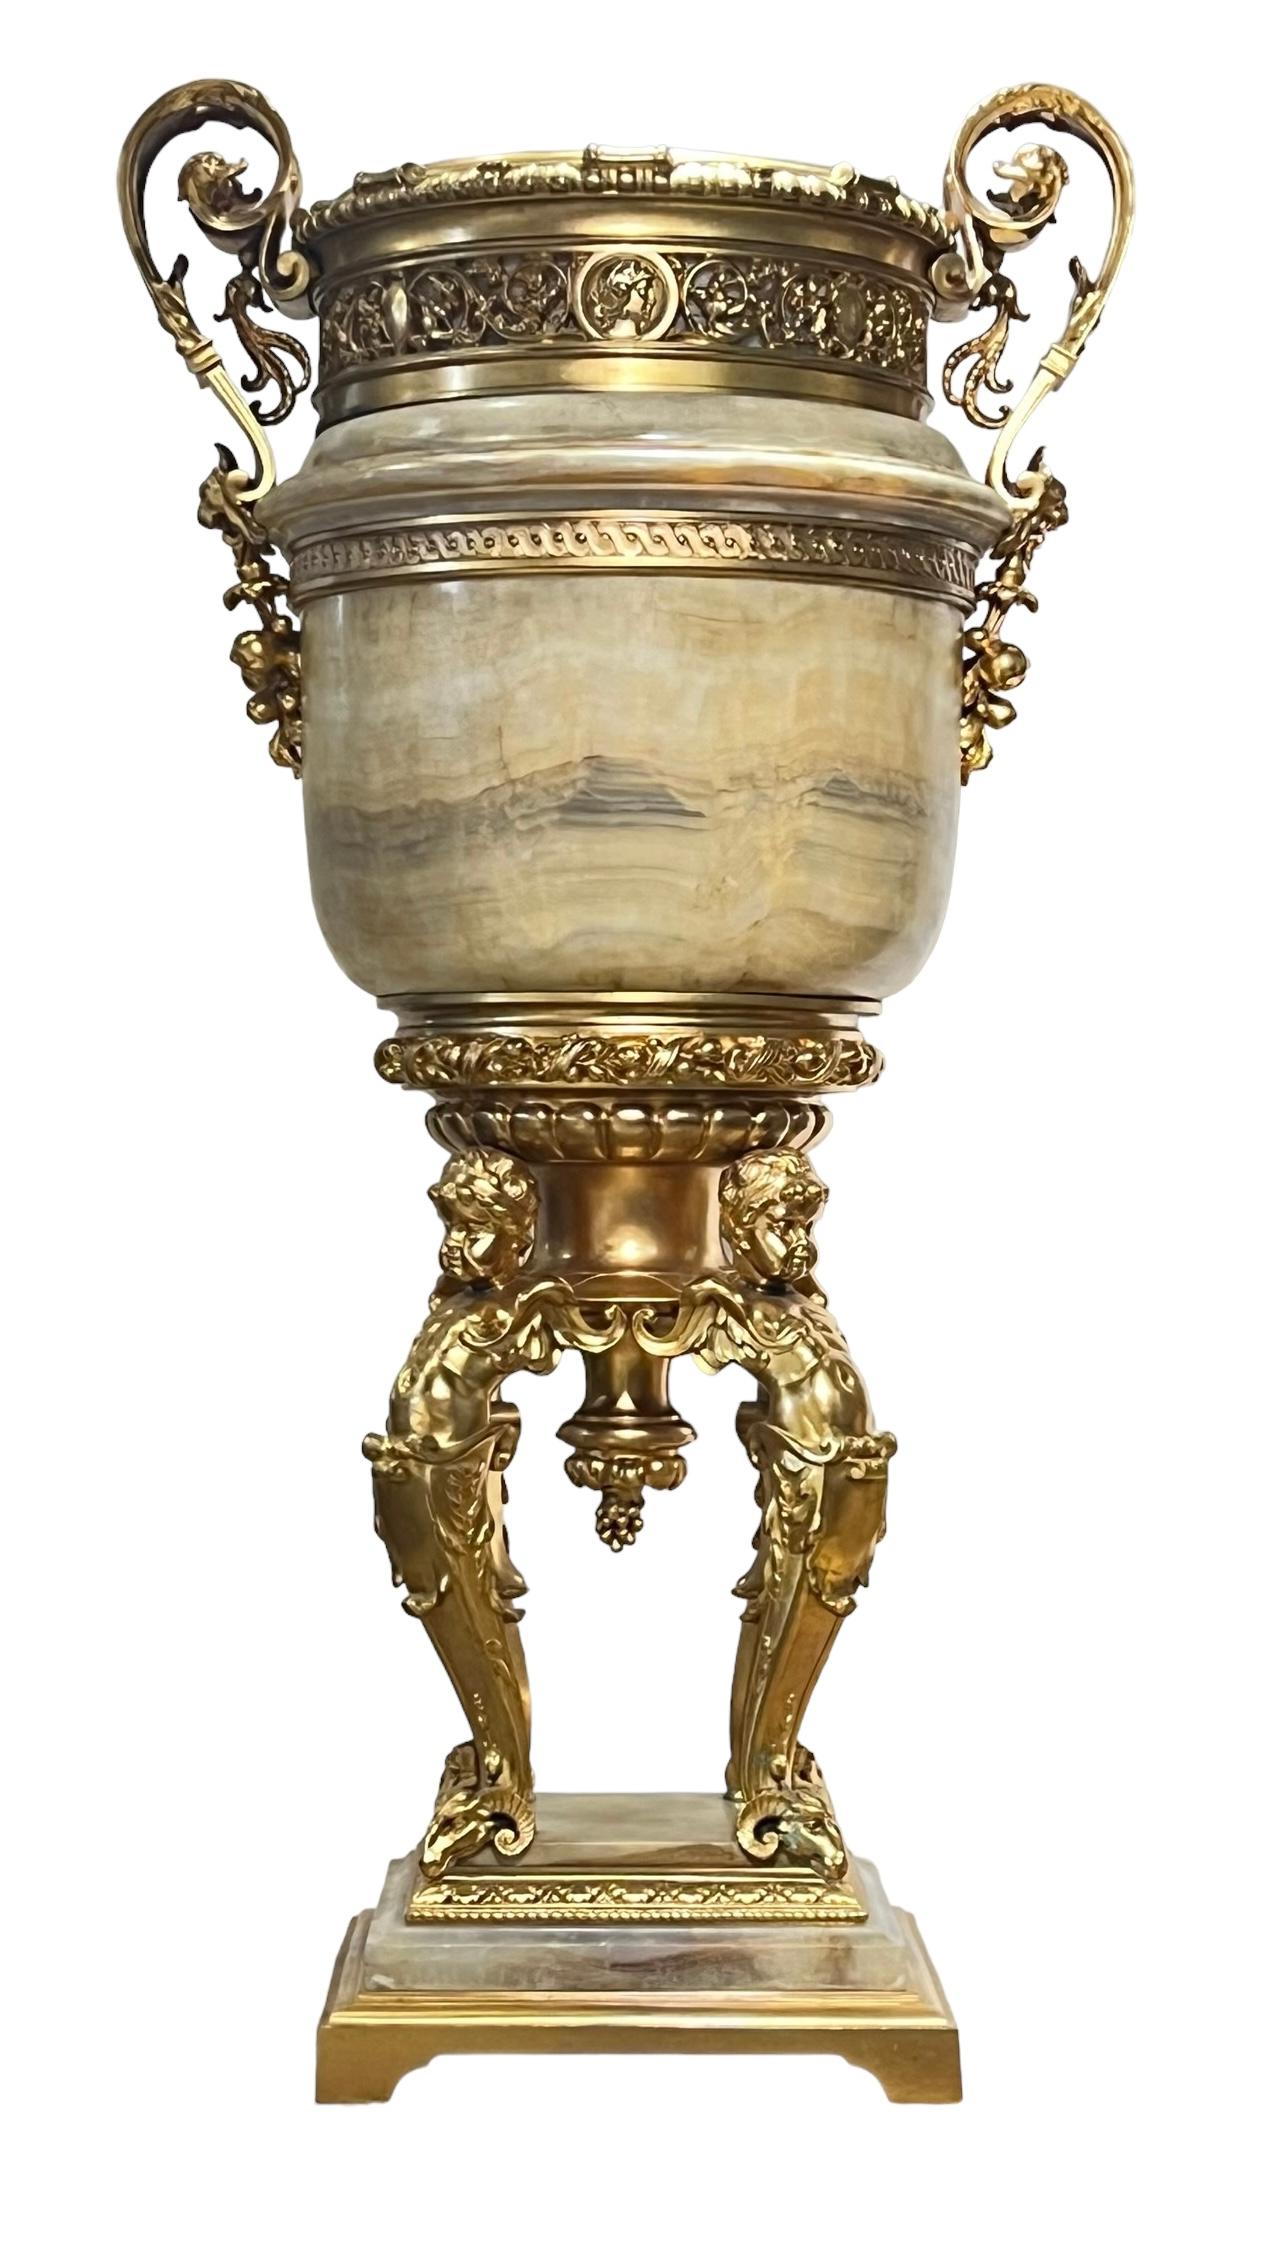 Palatial neoclassical onyx floor vase with gilt bronze mounts of the finest quality in the Louis XVI style, measuring 45.5 in (115 cm) tall.  Excellent condition.  Crafted in three sections.